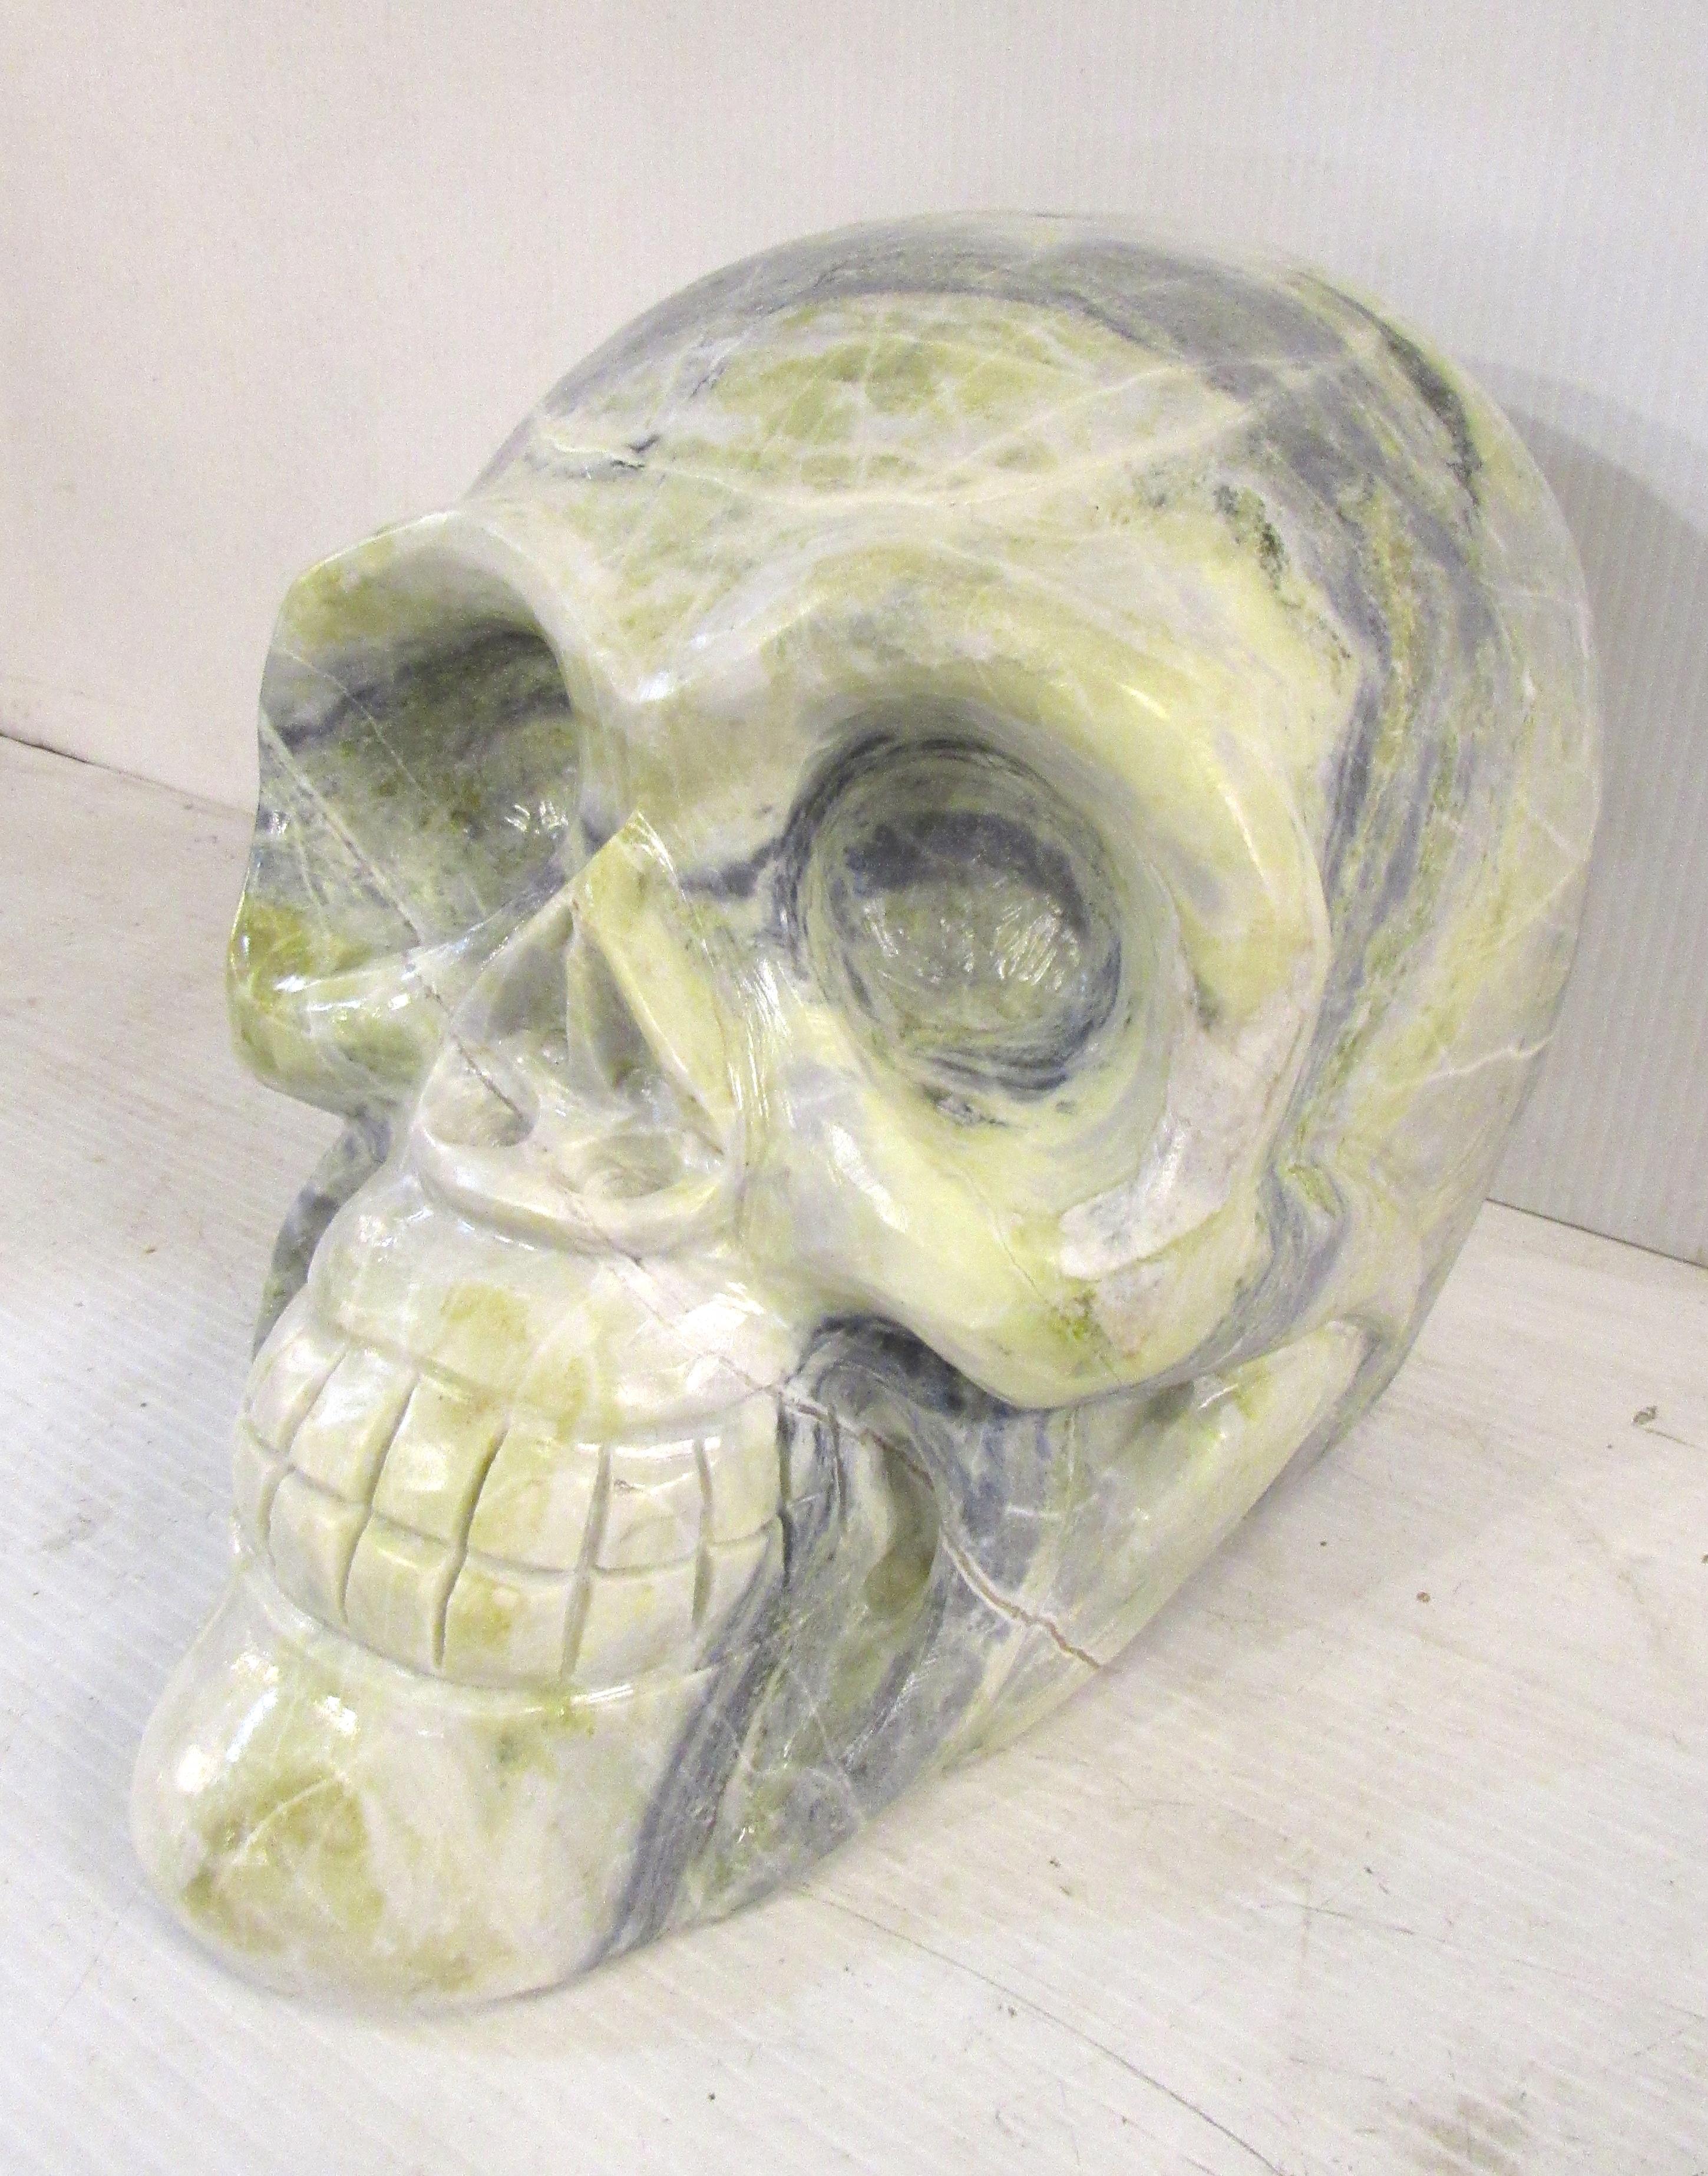 This stylized marble skull is sculpted from solid marble, showcasing the beautiful veins of color throughout the skull. An odd and unusual sculpture, this skull is sure to add a touch of edgy decorative flair to any space. Please confirm the item